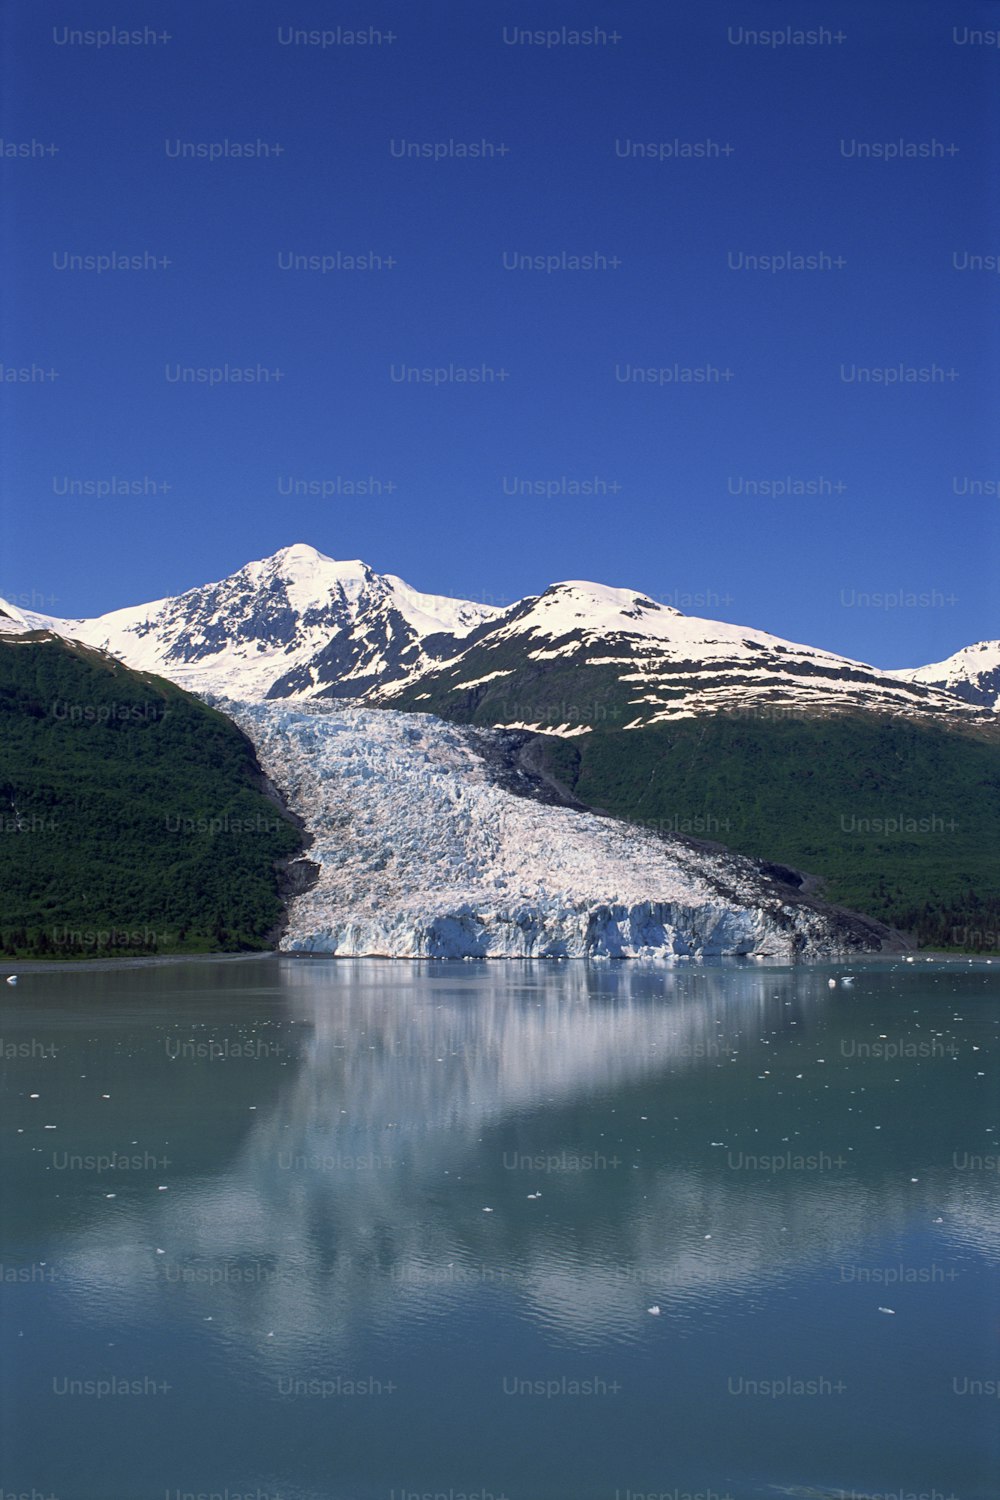 a glacier in the middle of a lake with mountains in the background